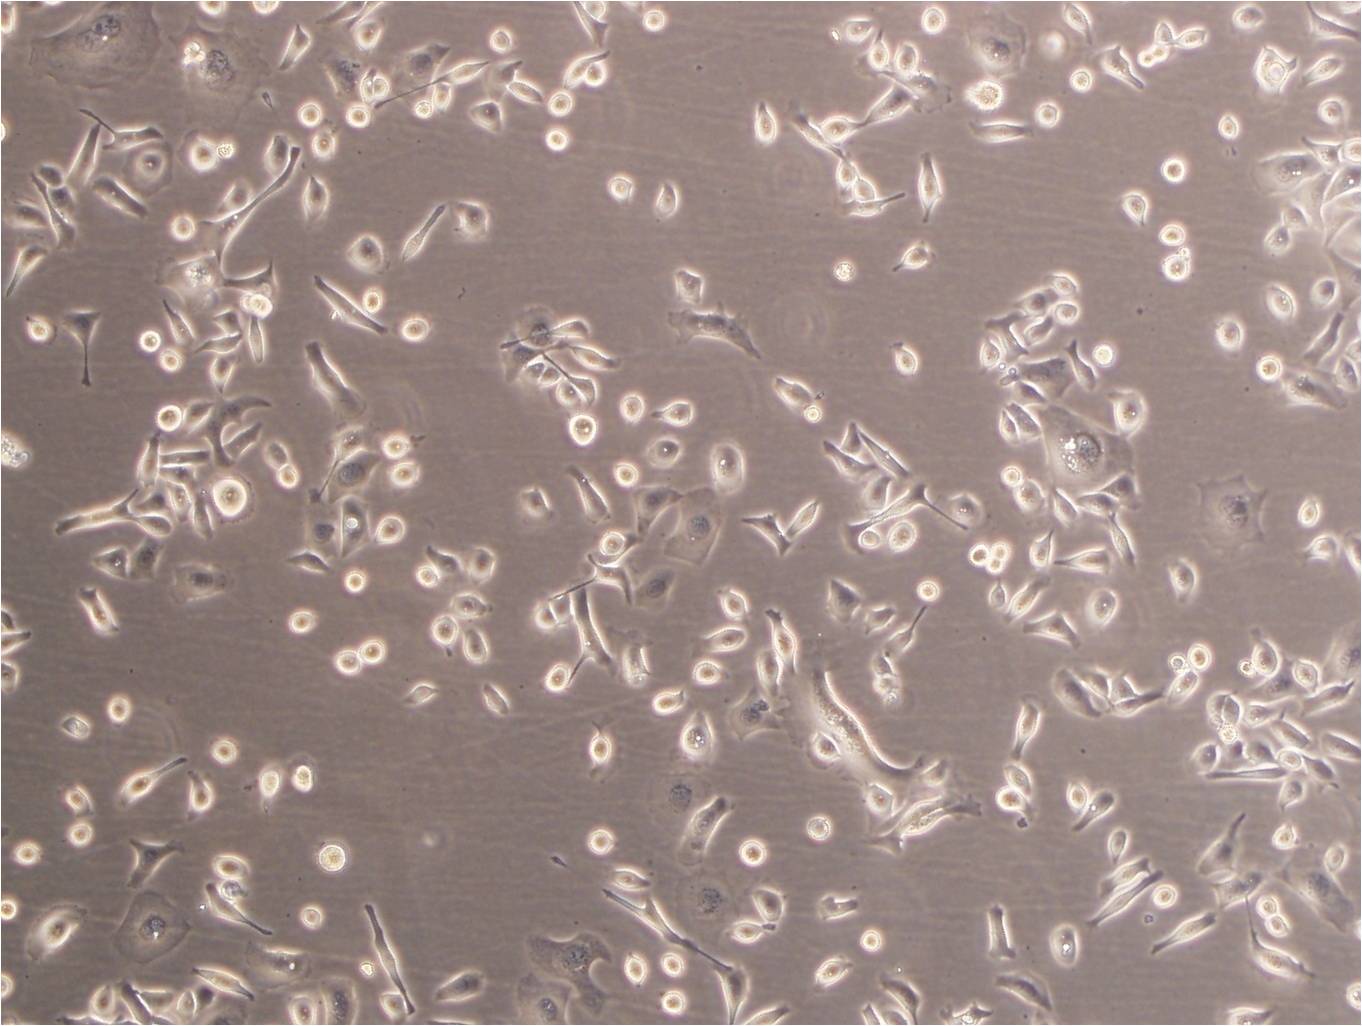 SW962 epithelioid cells人阴户鳞癌细胞系,SW962 epithelioid cells